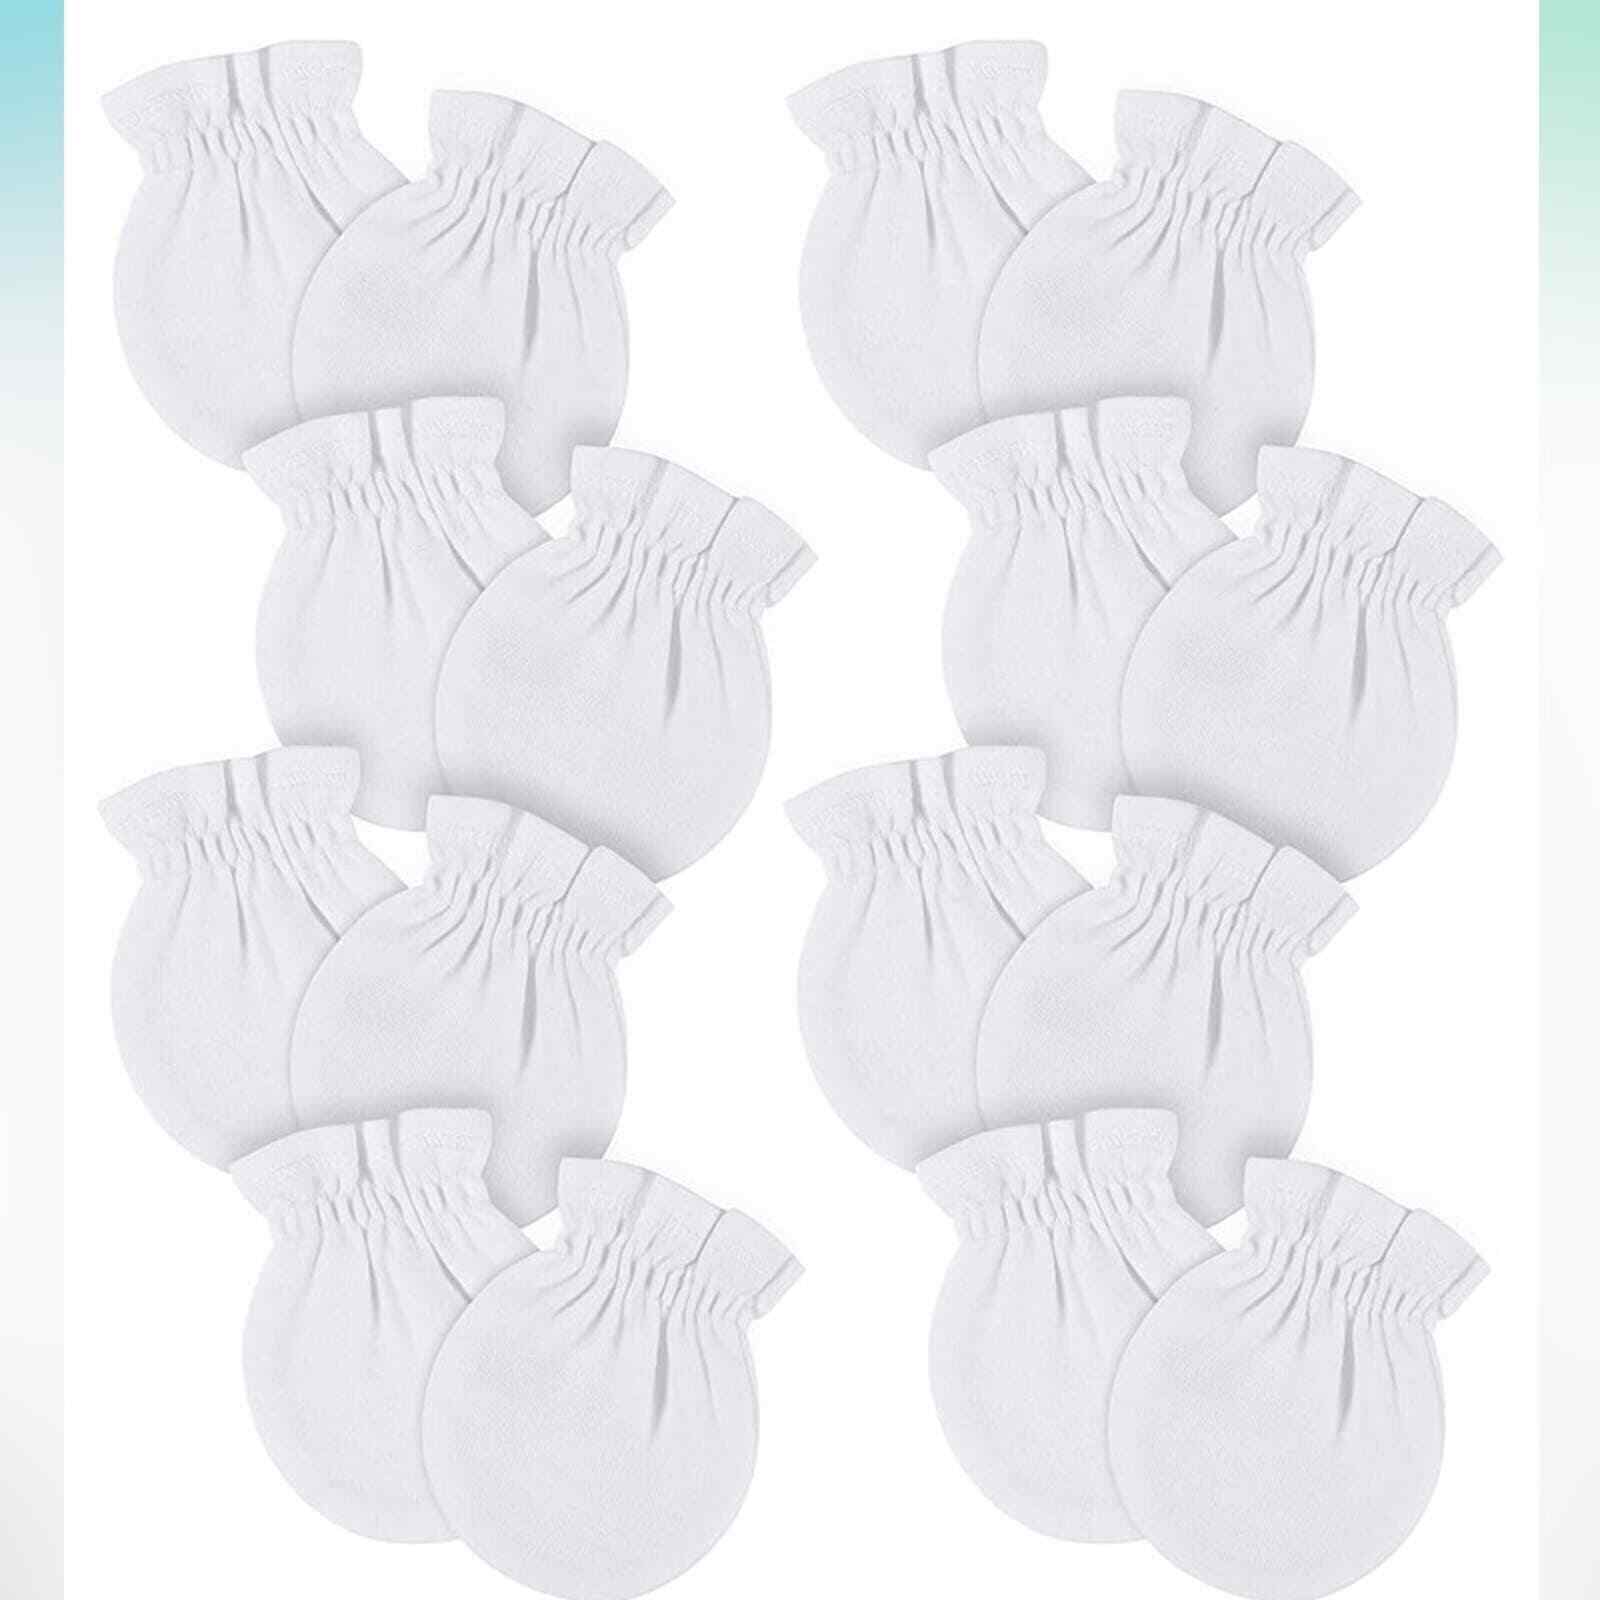 Gerber Baby No Scratch Mittens, White, 0-3 Months (8-Pack) New With Tags